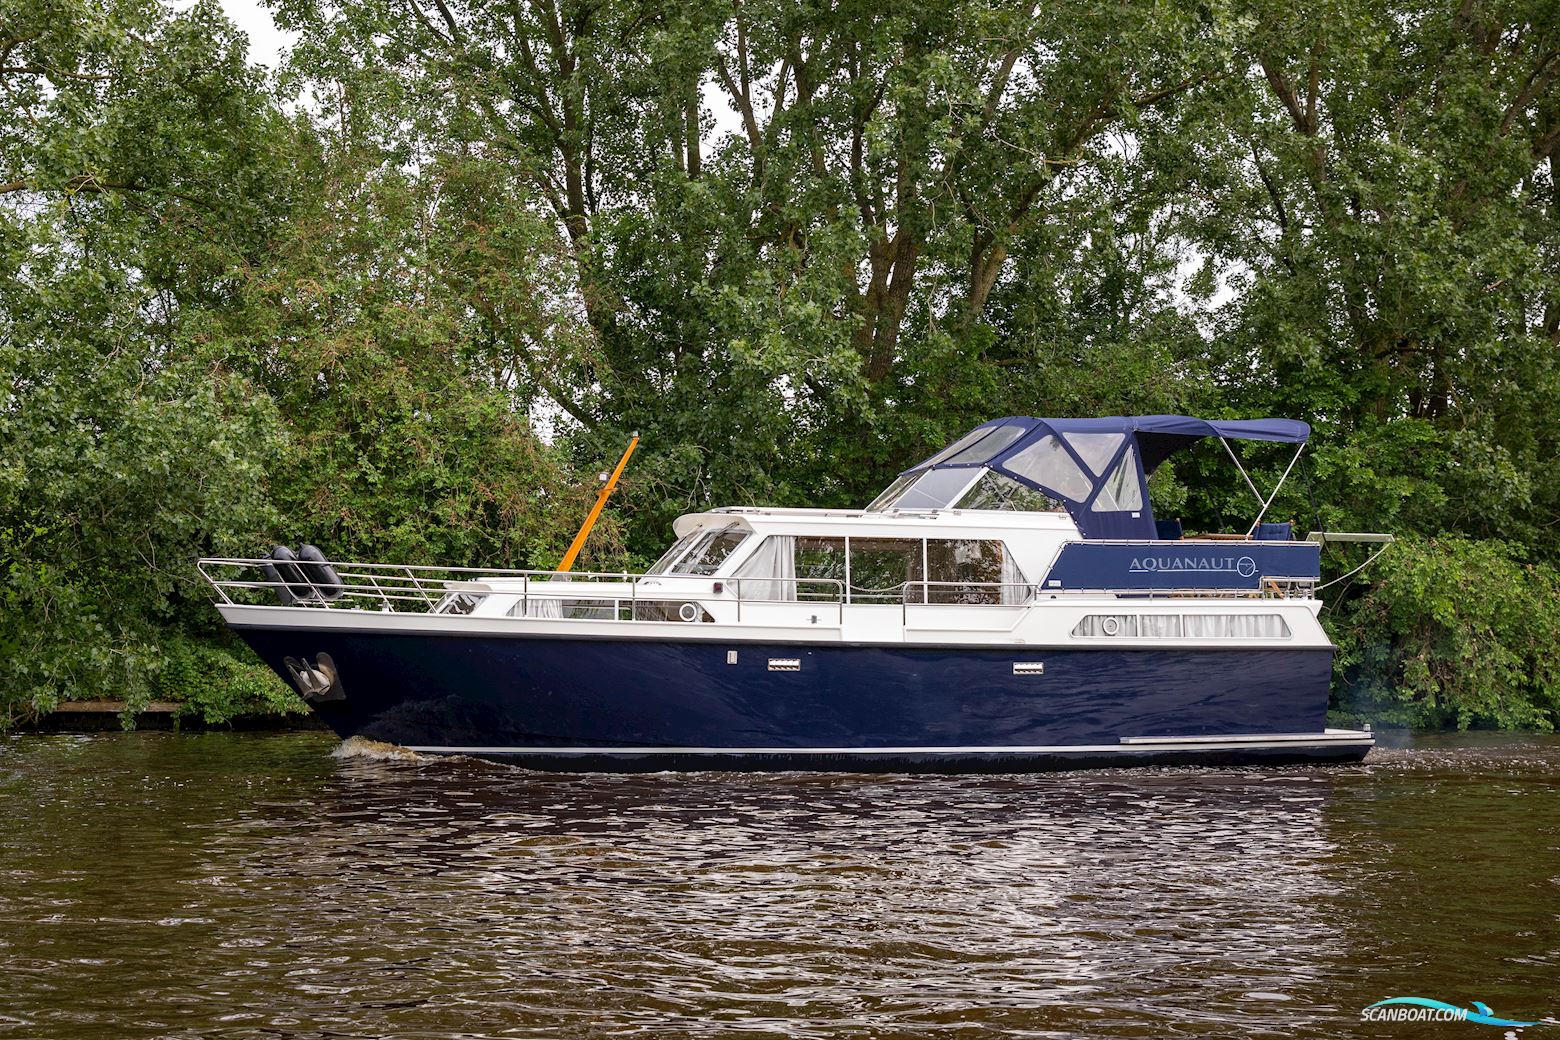 Aquanaut Beauty 1200 AK Motor boat 1994, with Volvo Penta engine, The Netherlands